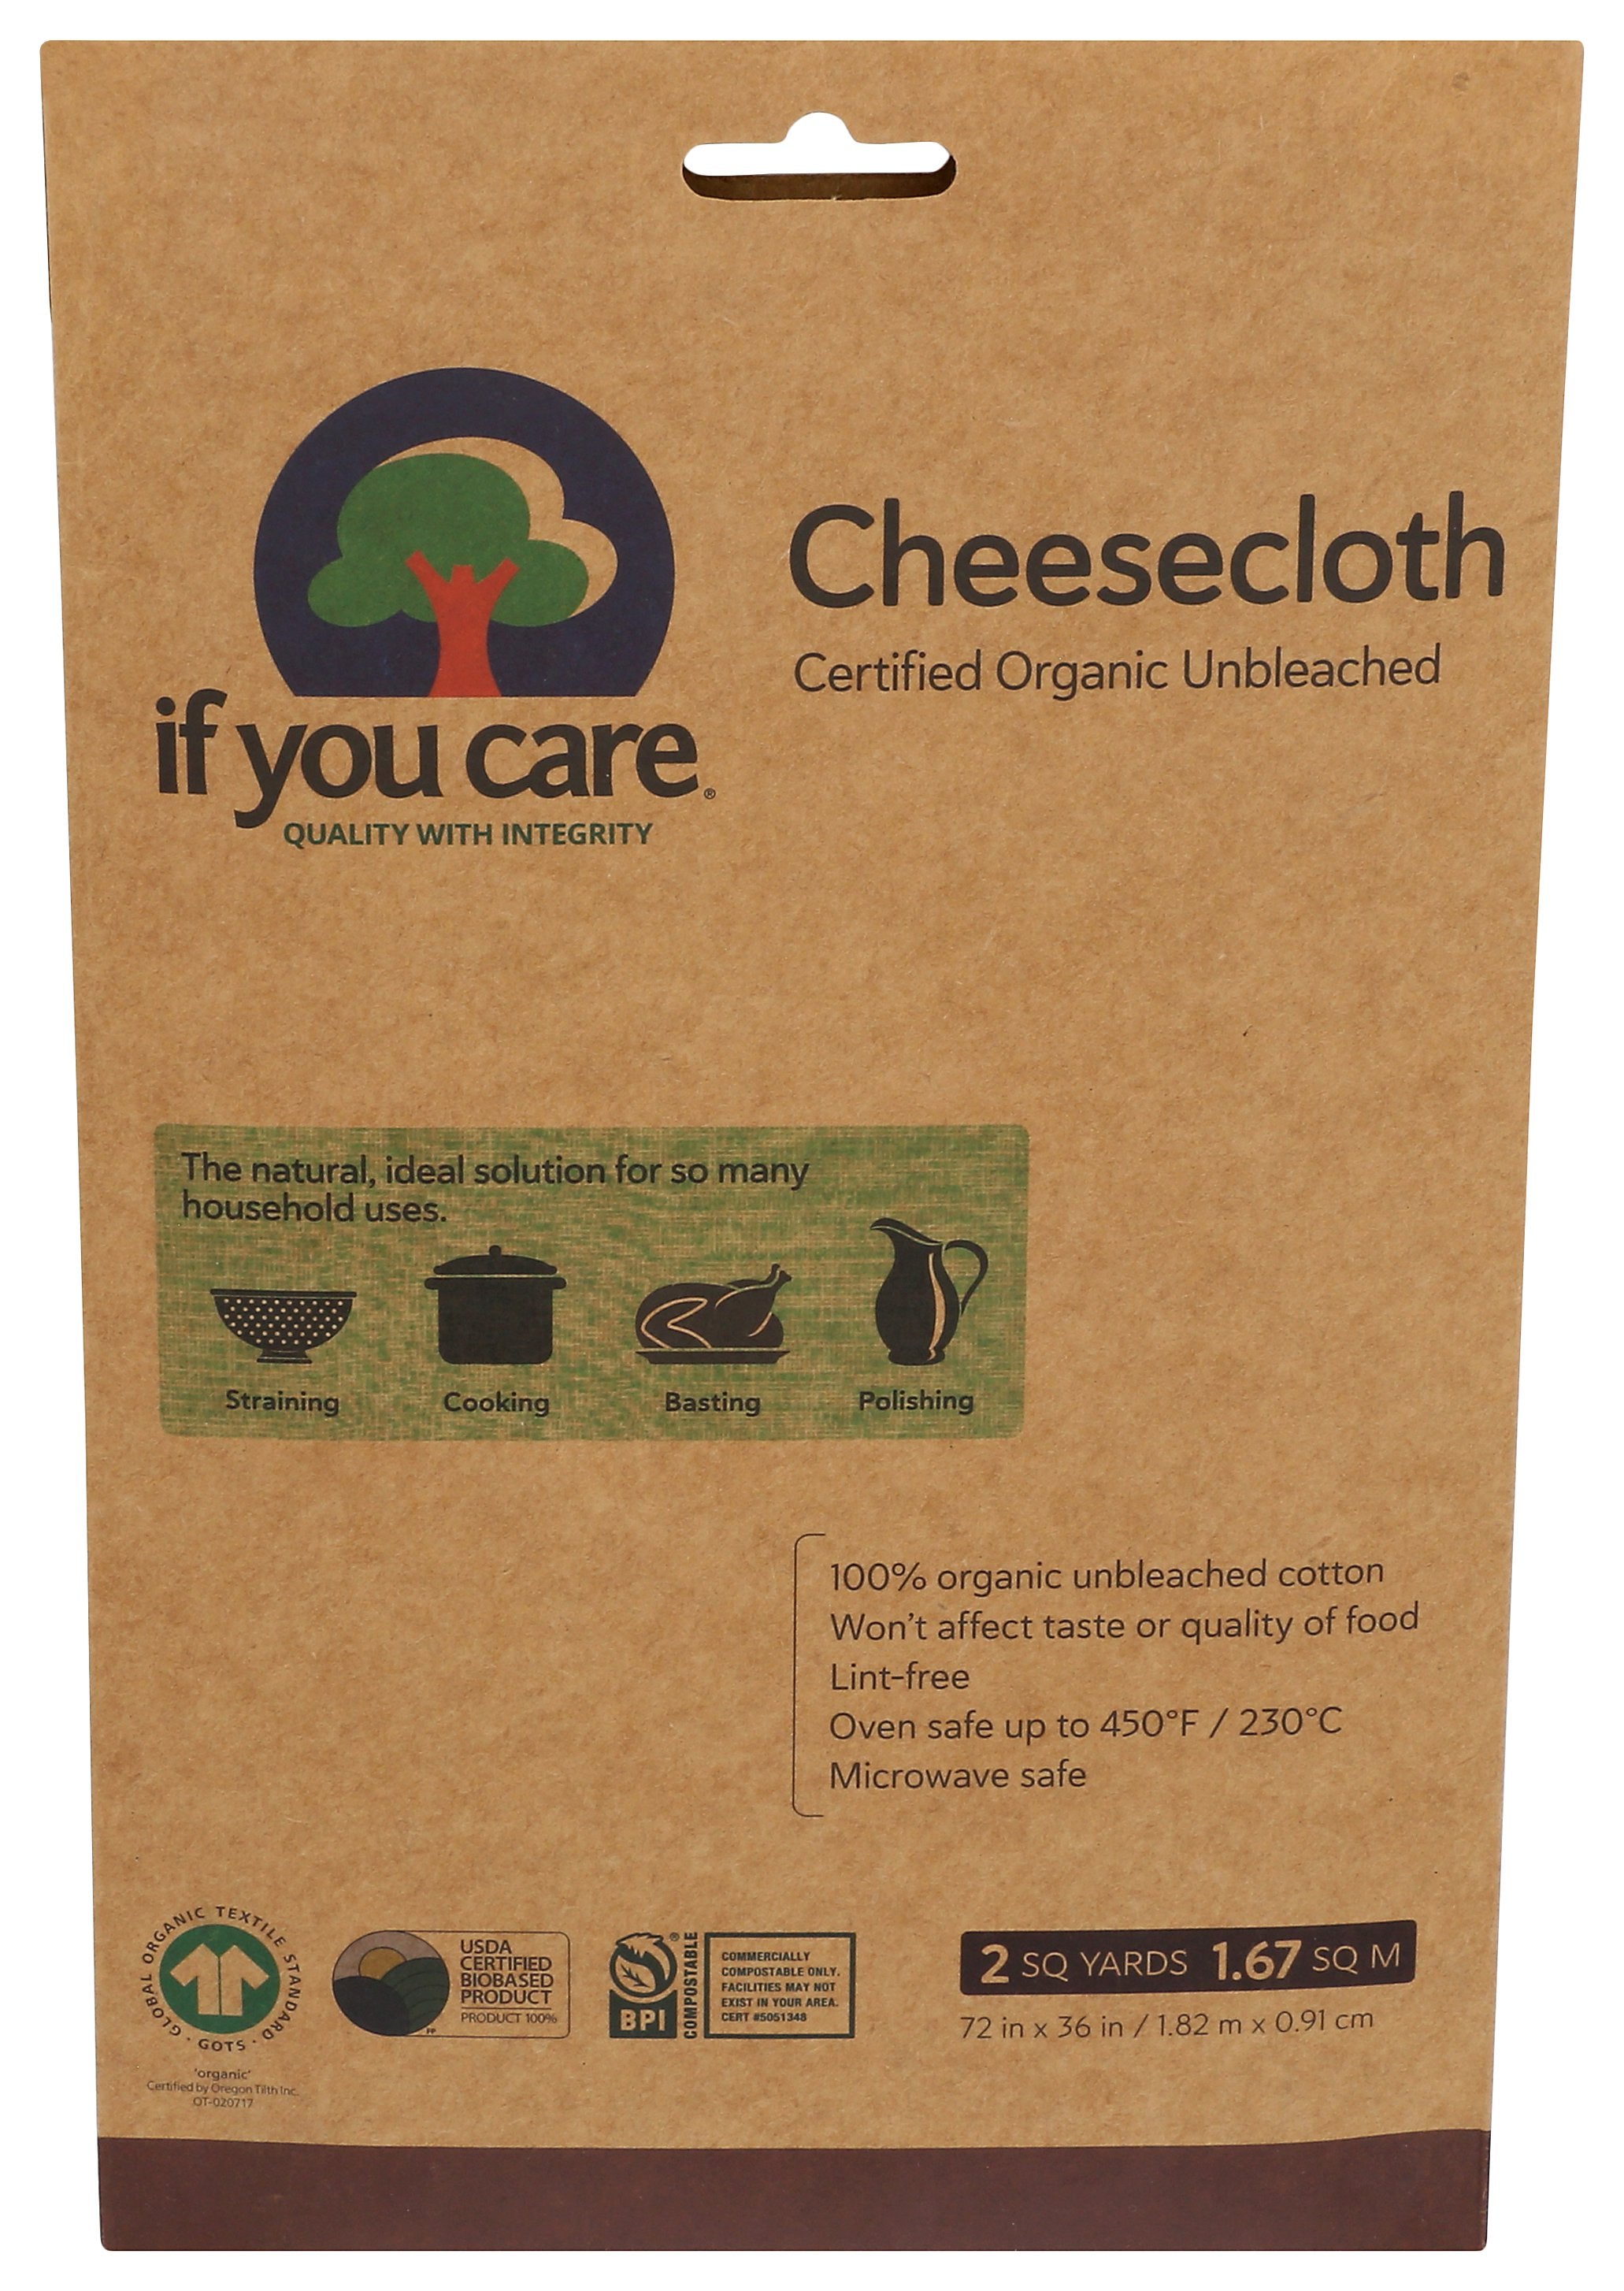 IF YOU CARE CHEESECLOTH UNBLCHD 2SQ Y - Case of 6